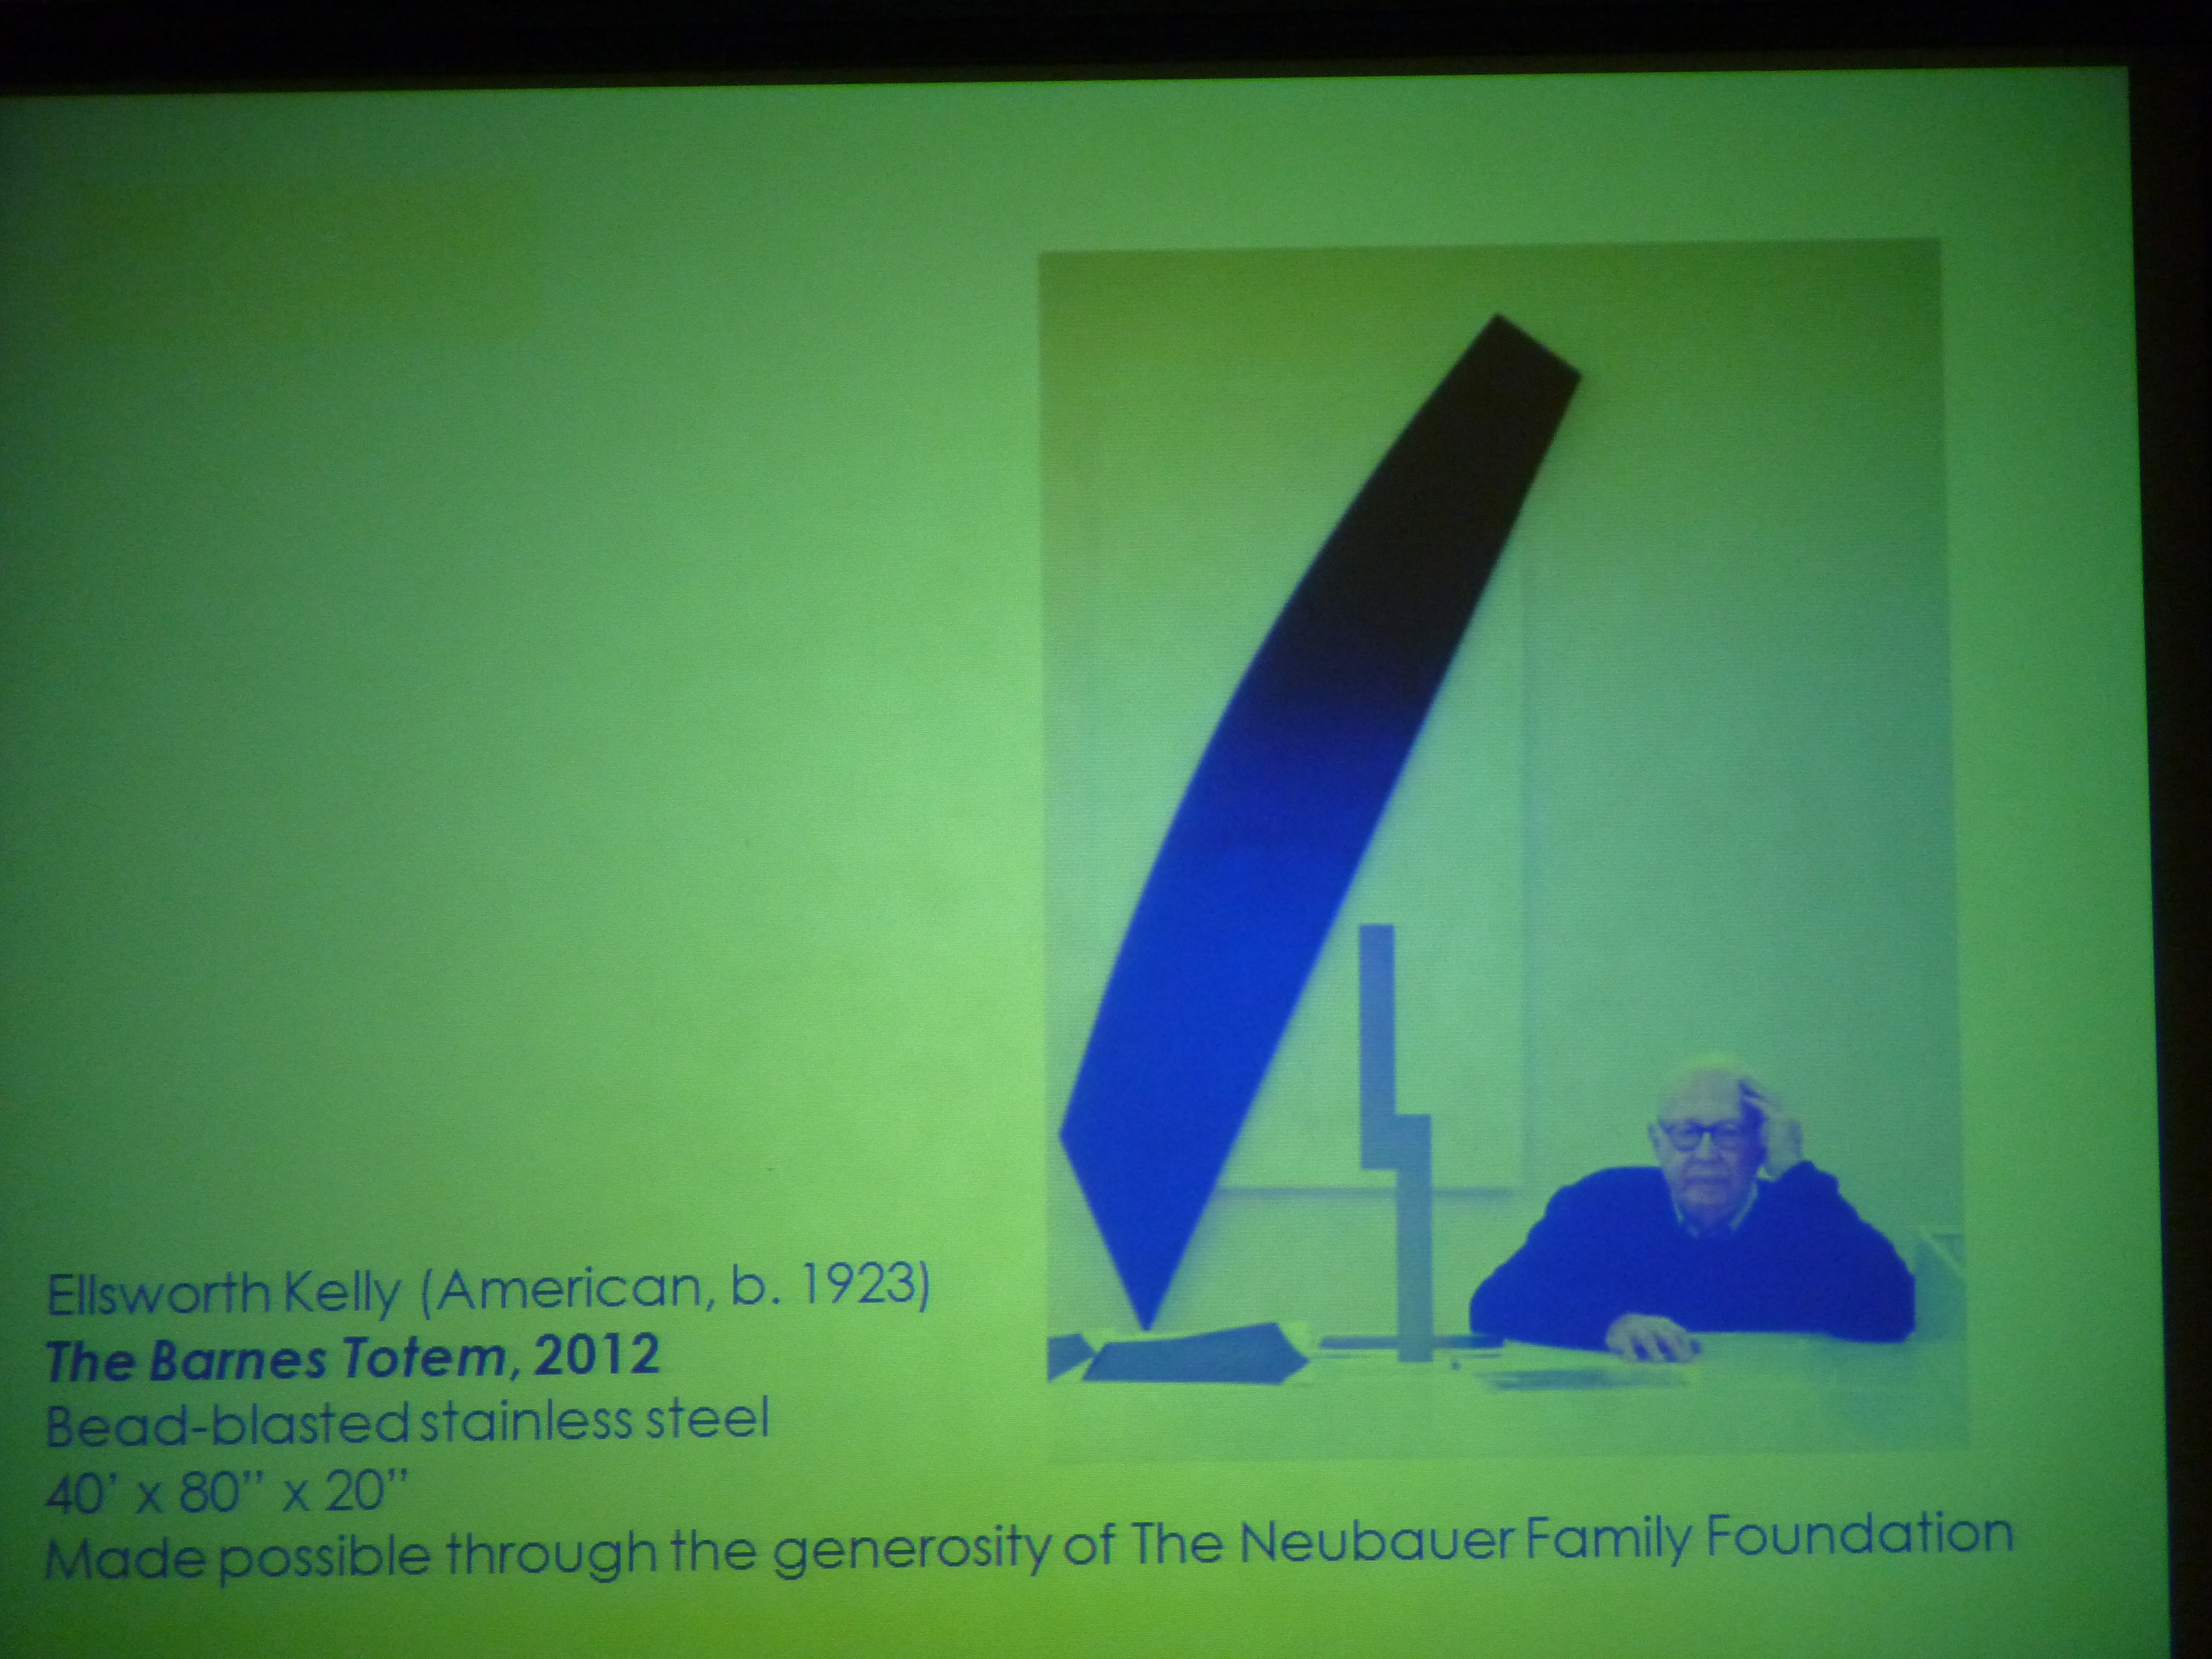 Ellsworth Kelly with drawing of The Barnes Totem